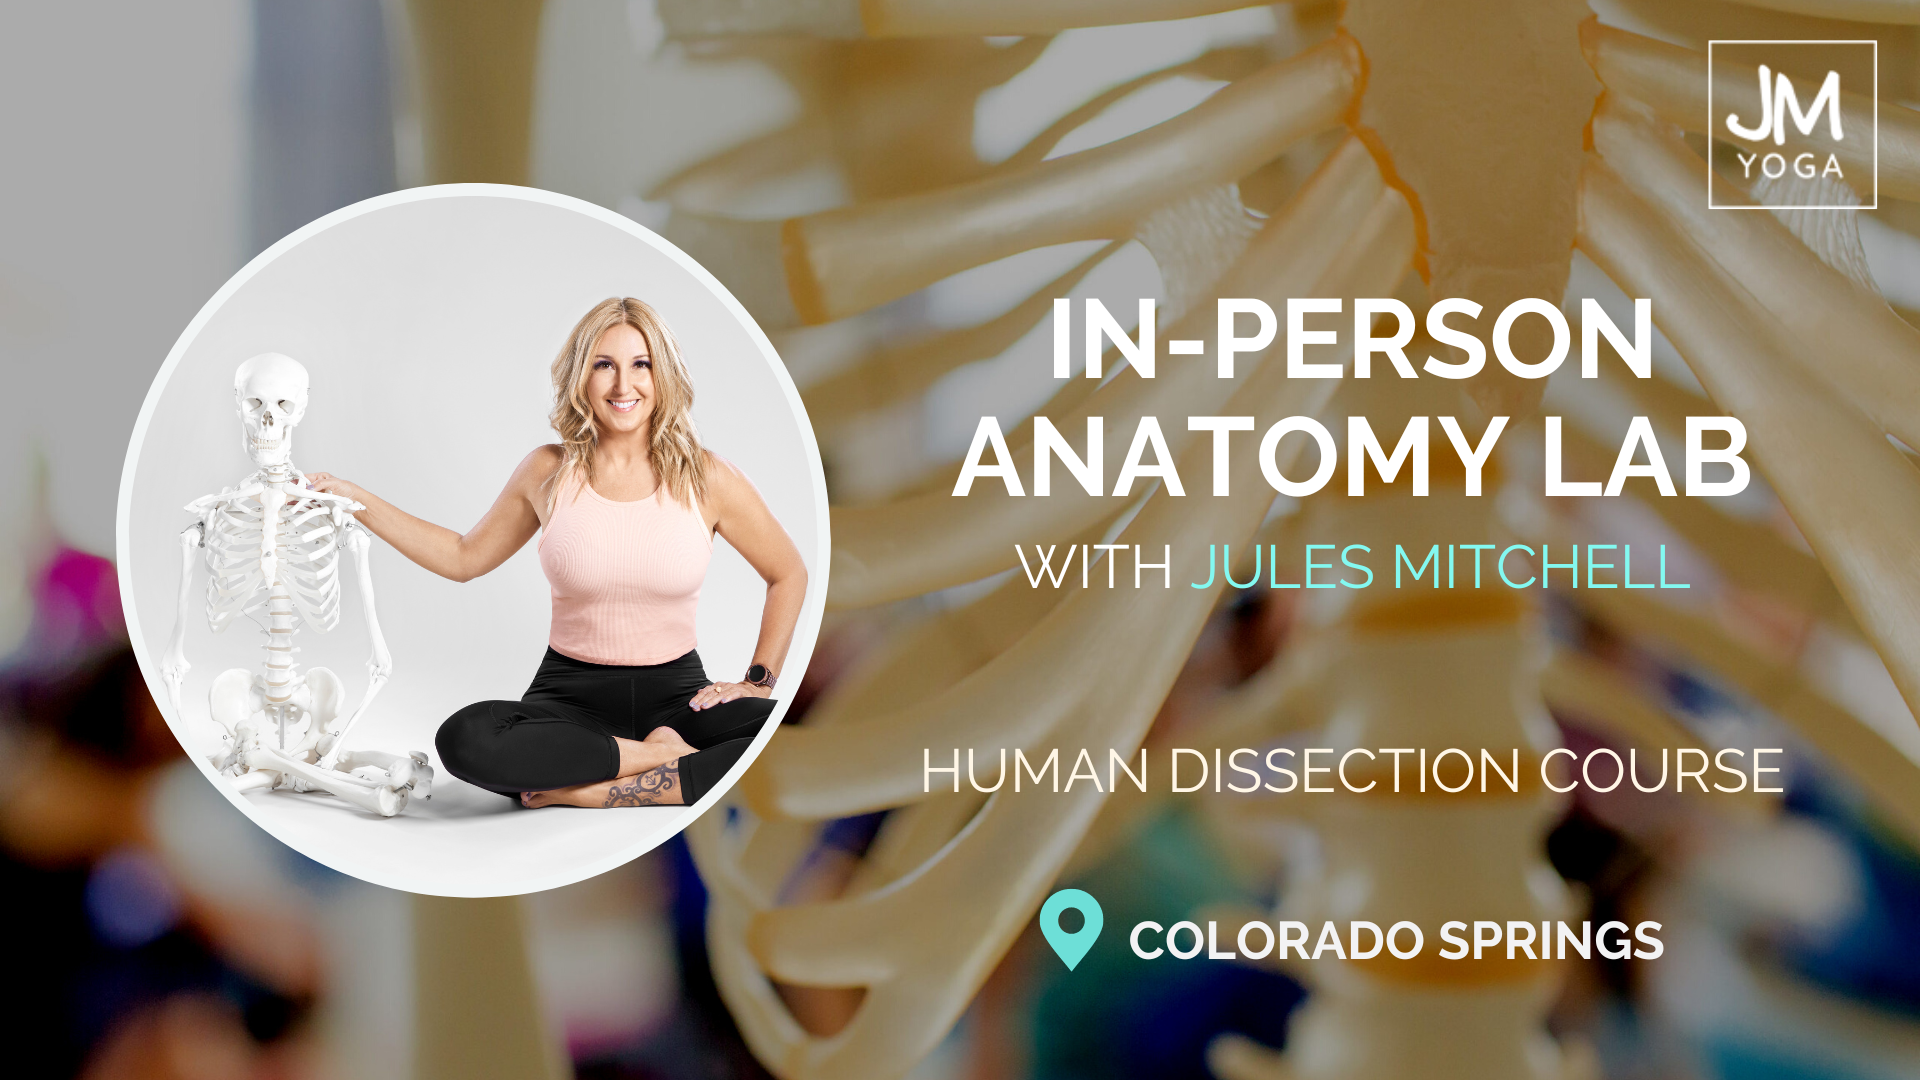 Human dissection course with Jules Mitchell